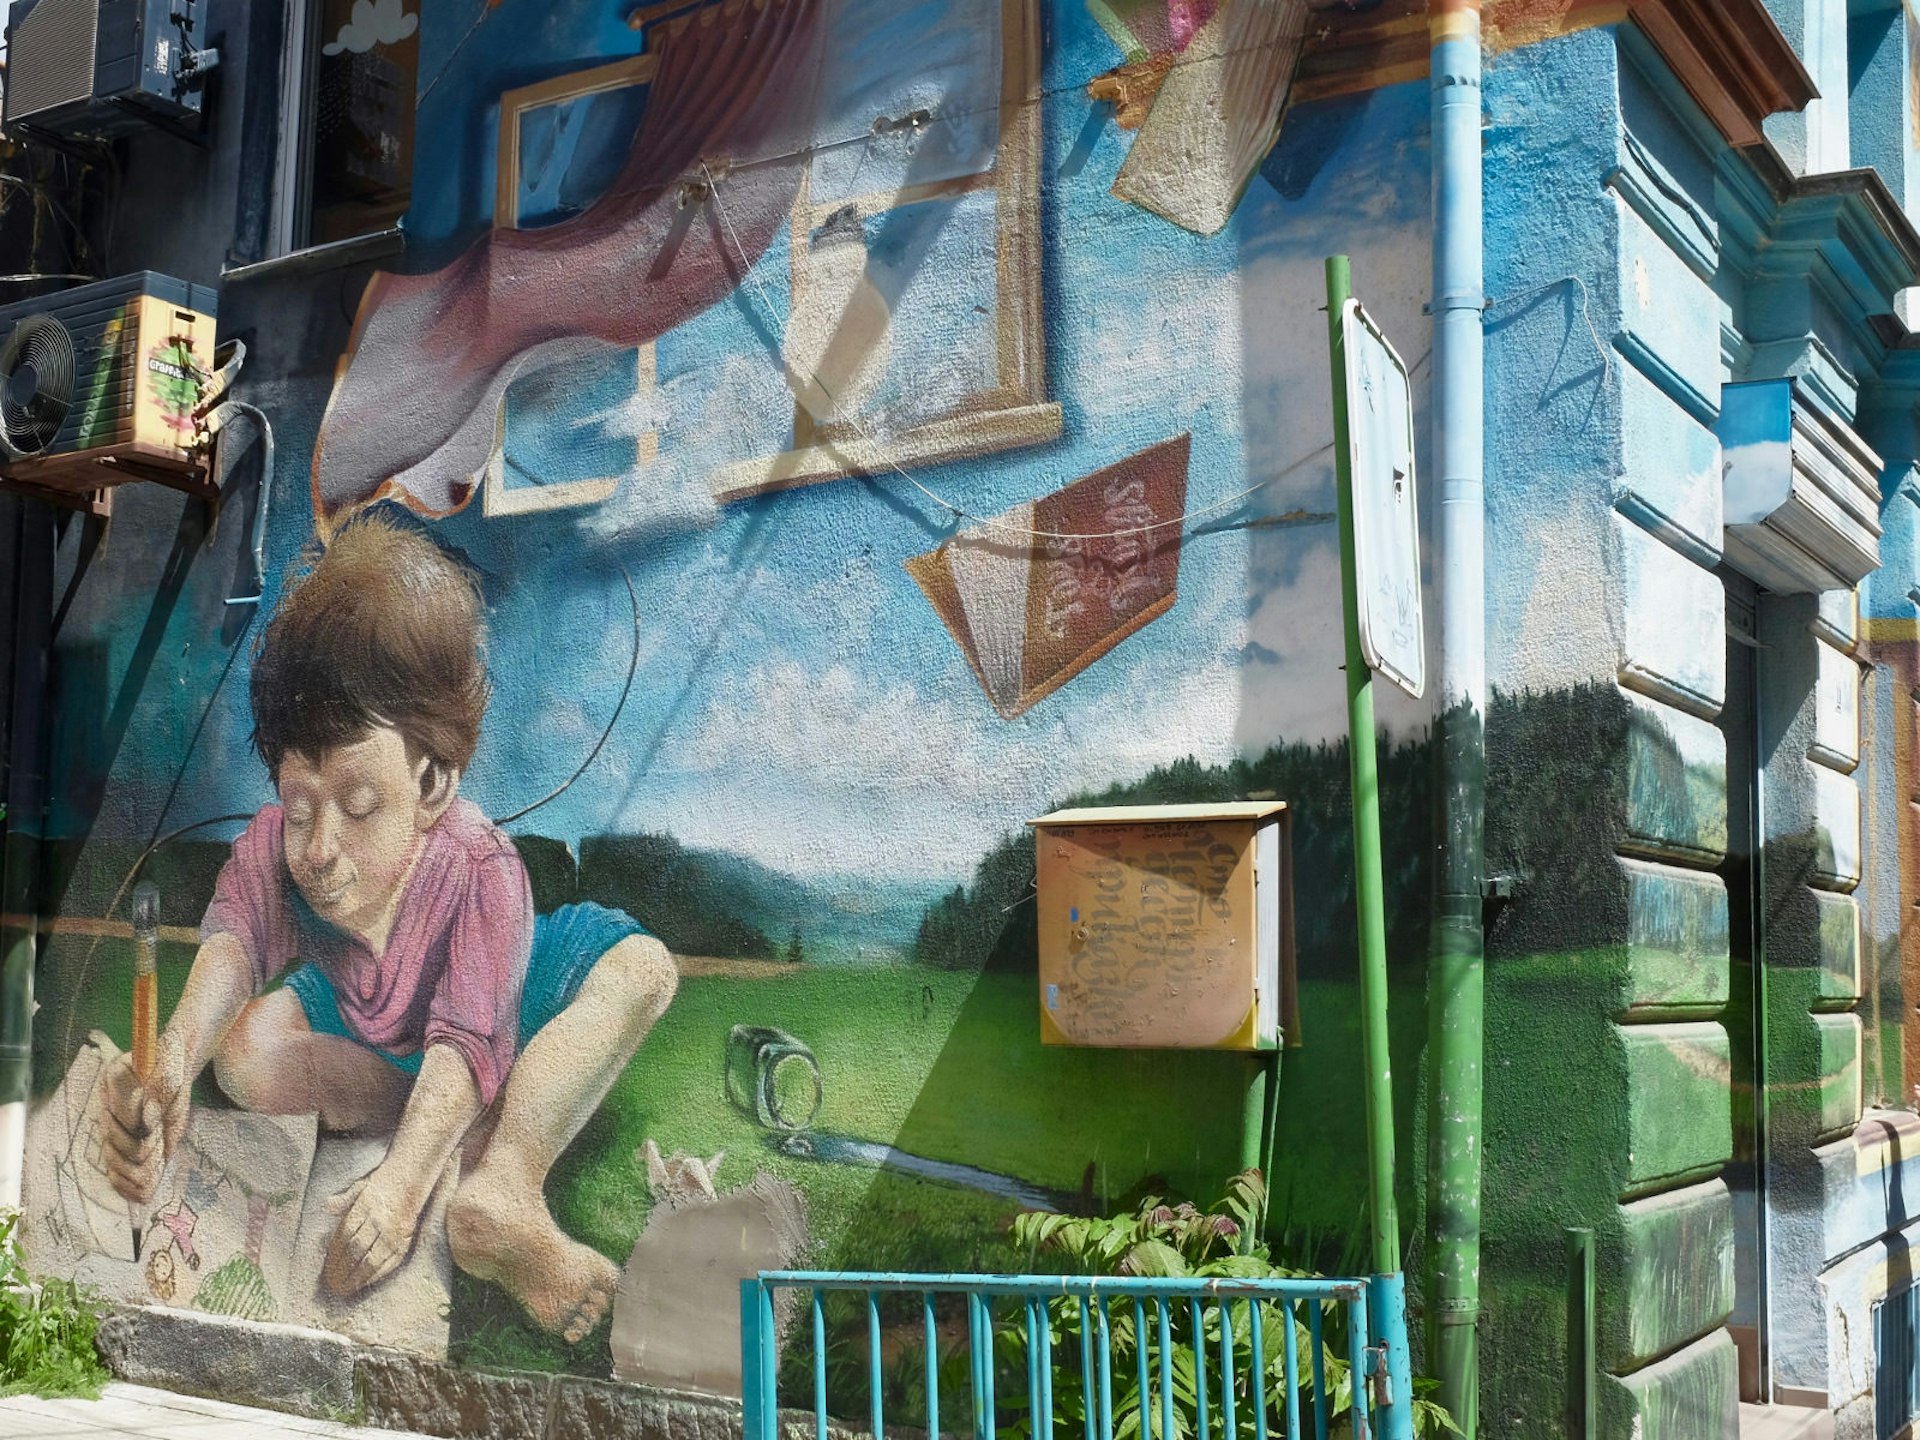 A cheerful street mural in Sofia © Mark Baker / Lonely Planet